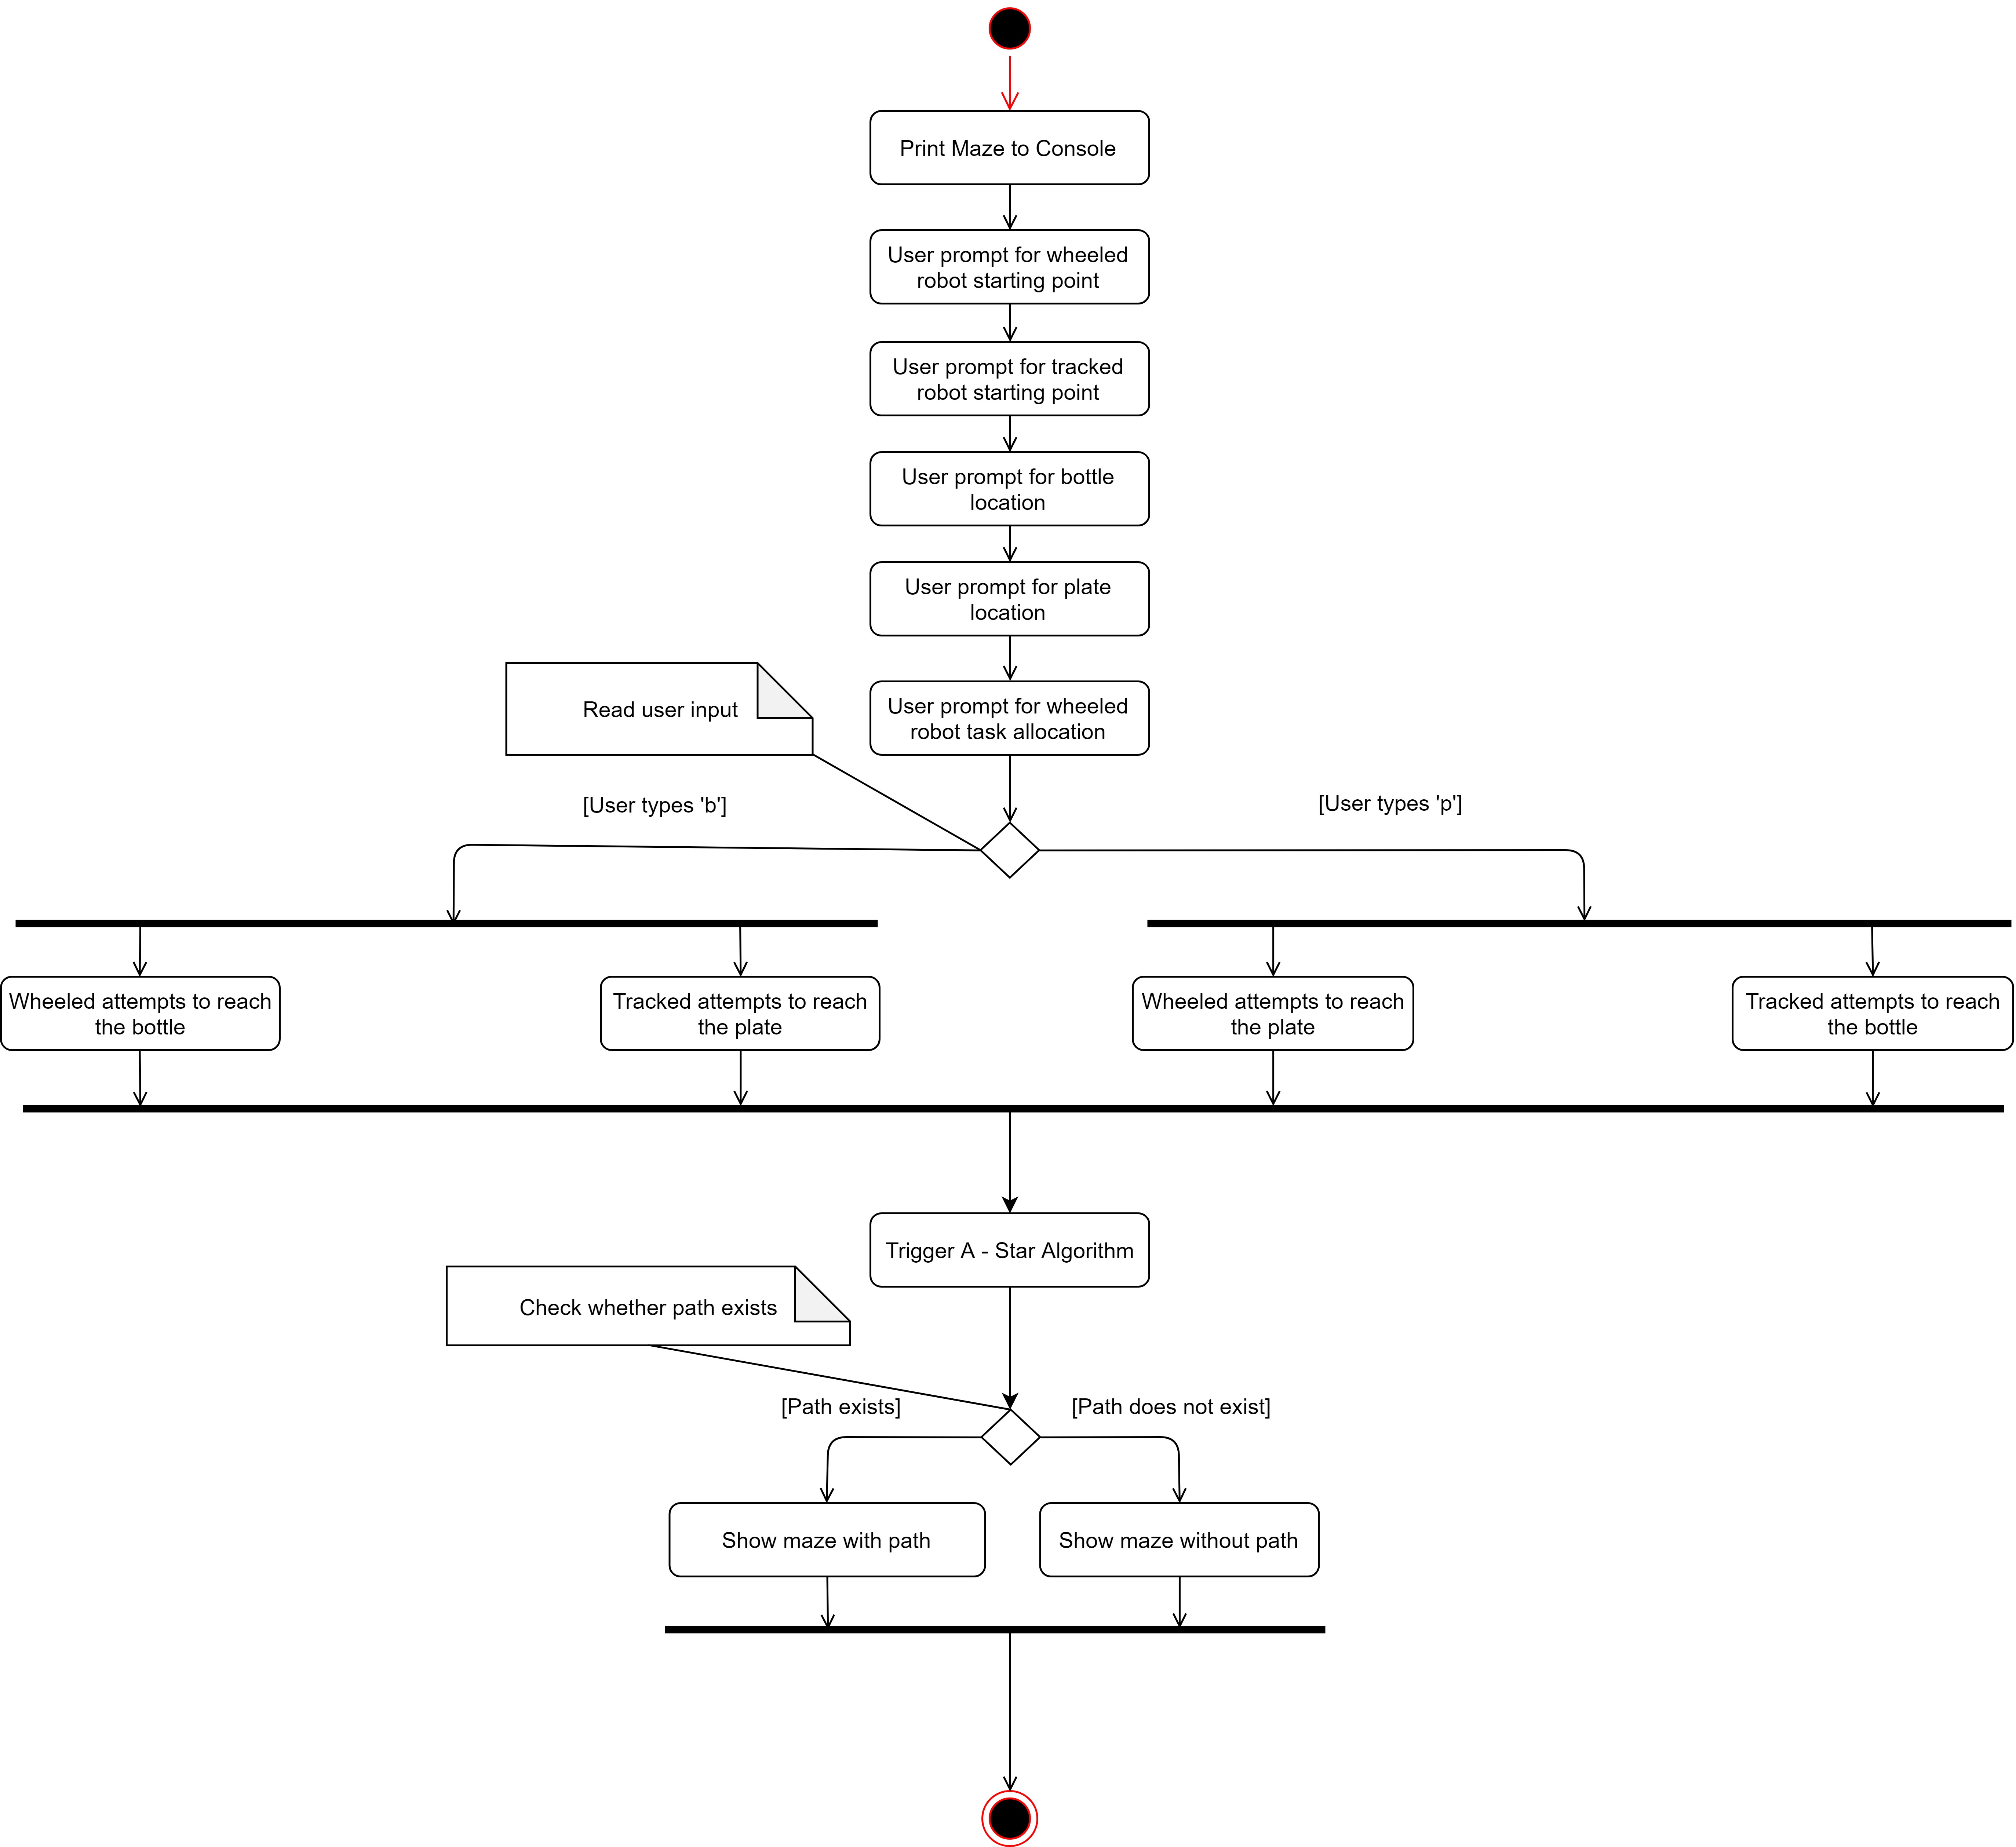 UML Activity Diagram for the Project